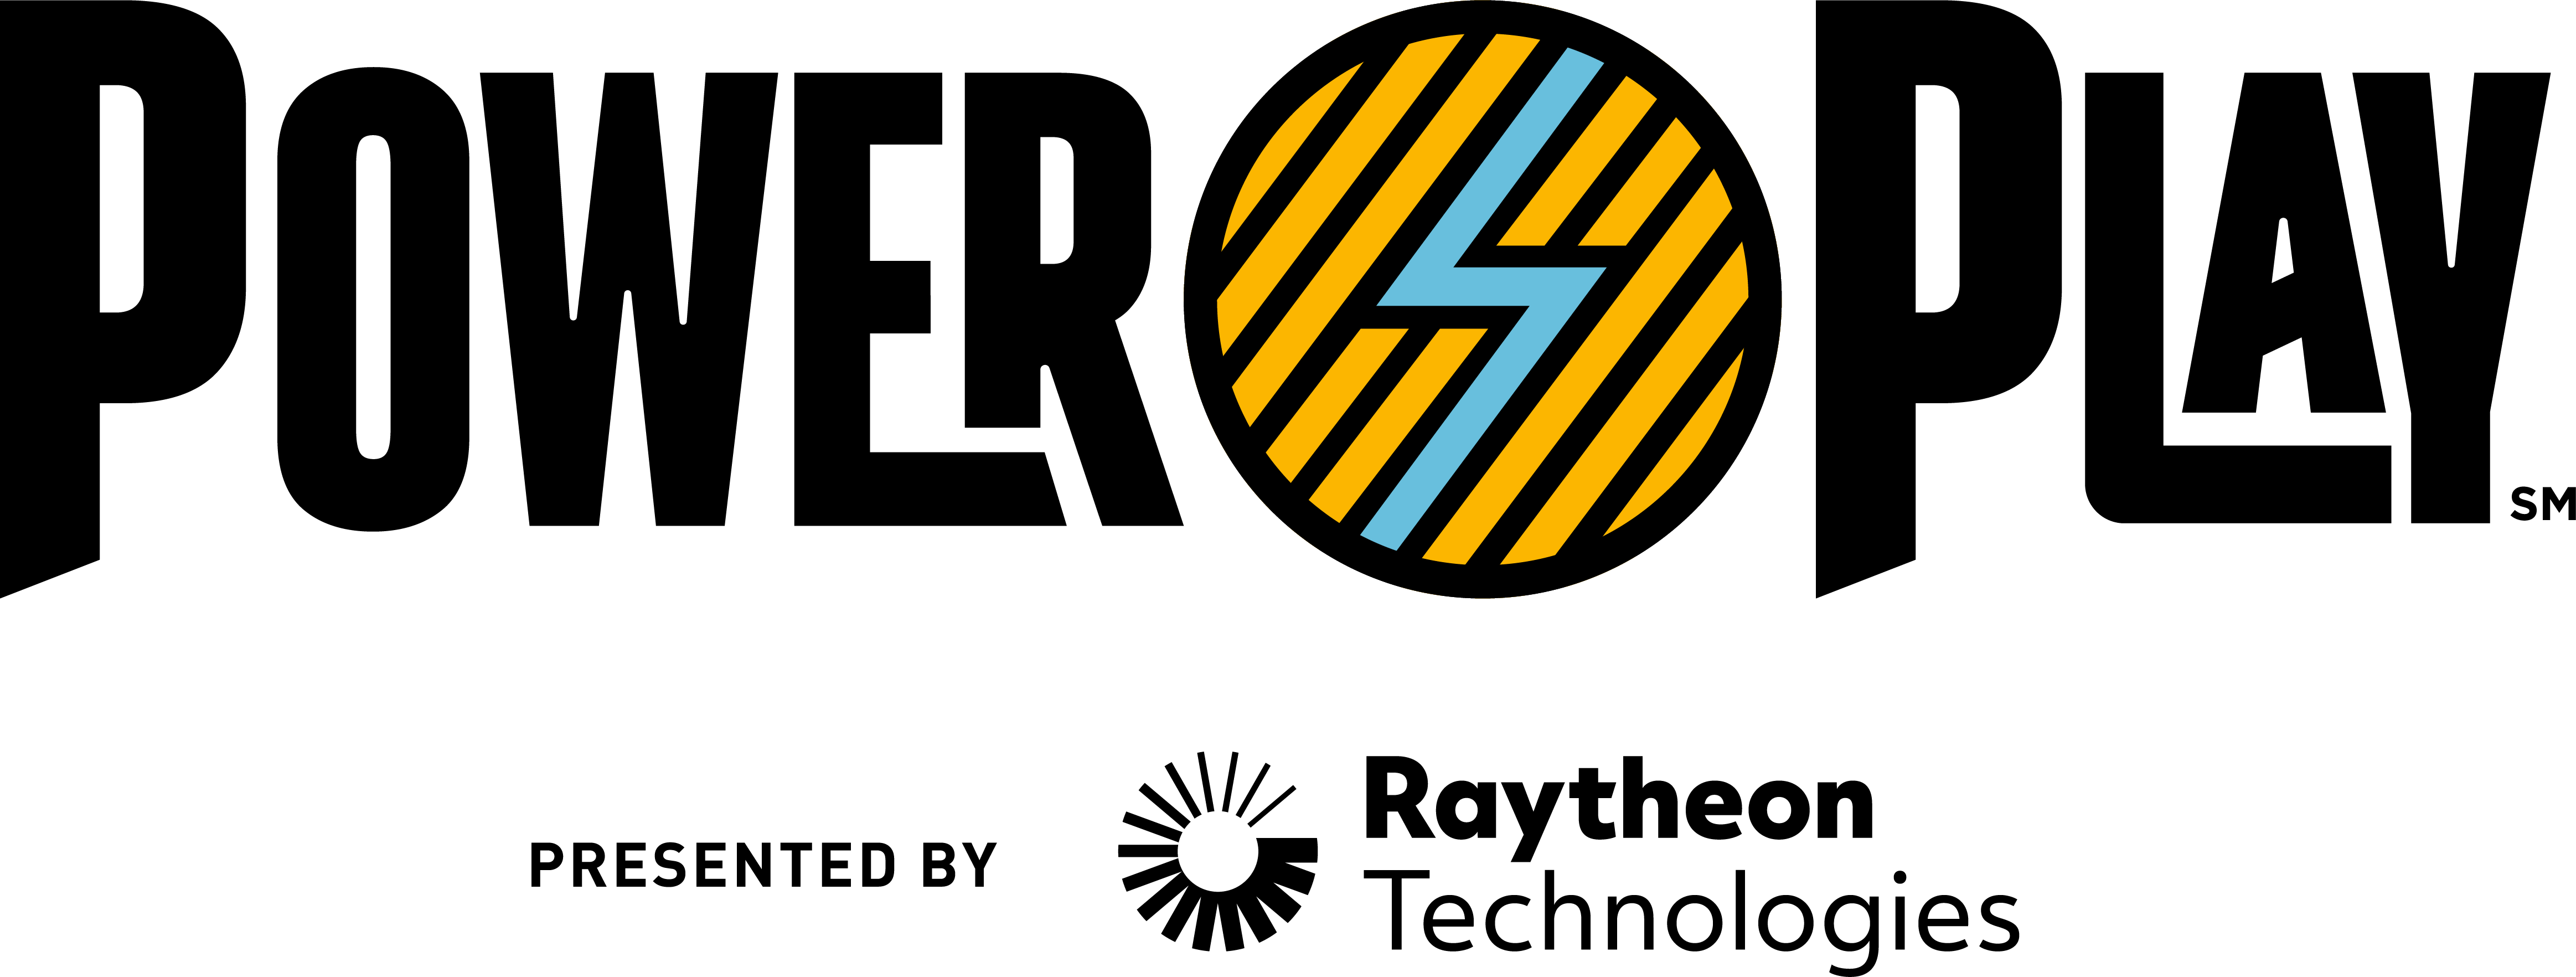 Power Play, presented by Raytheon Technologies